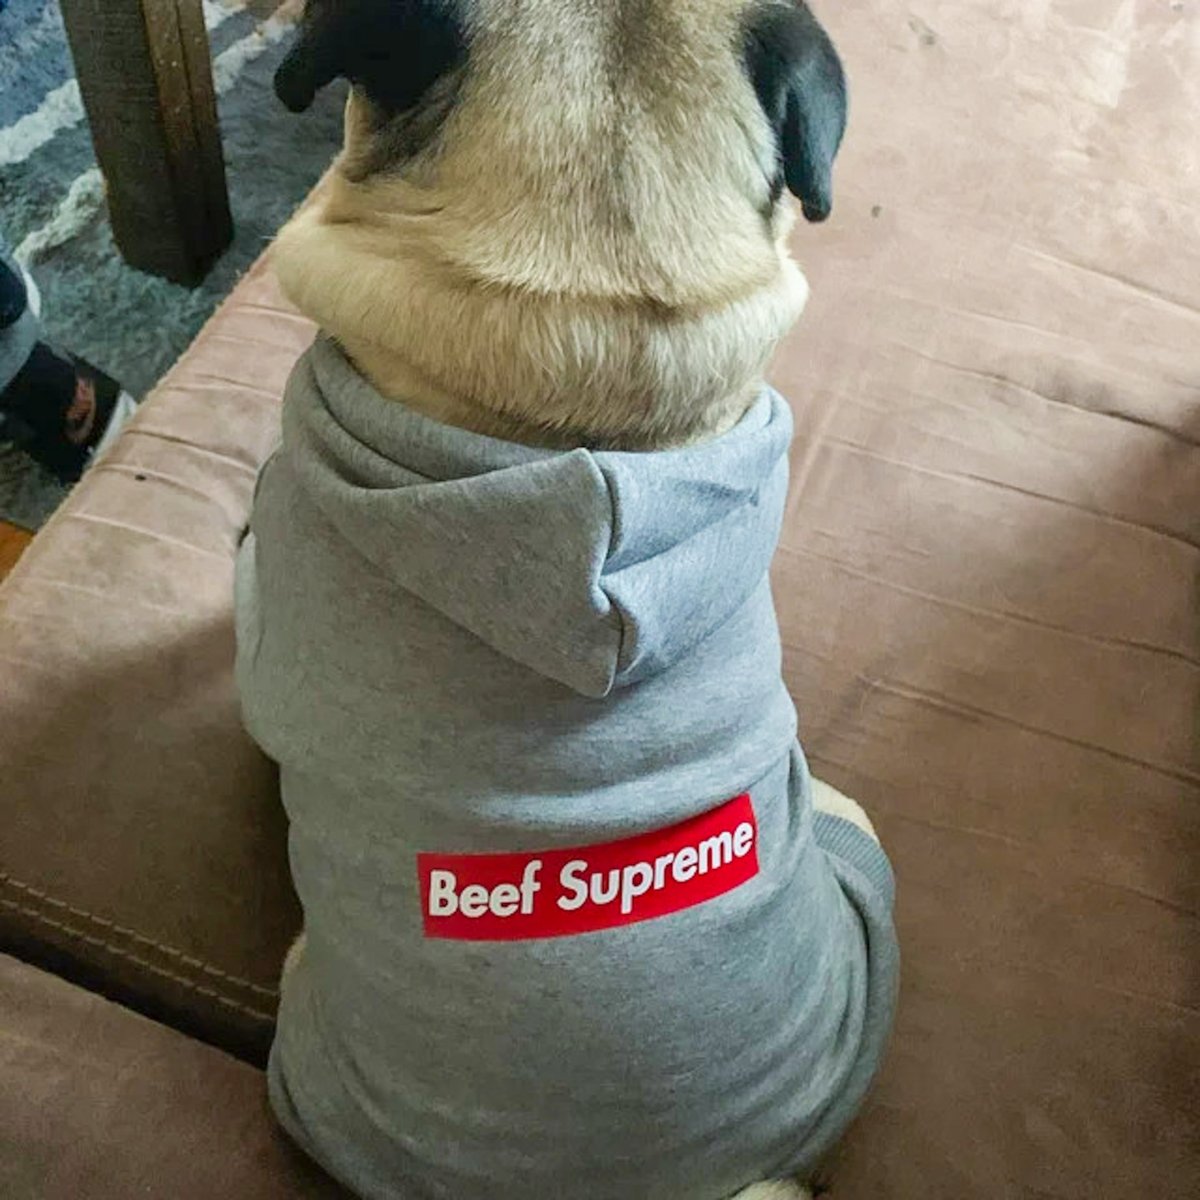 It's MR. Beef Supreme to you! 💁‍♂️

#dogsweater #cutedogclothes